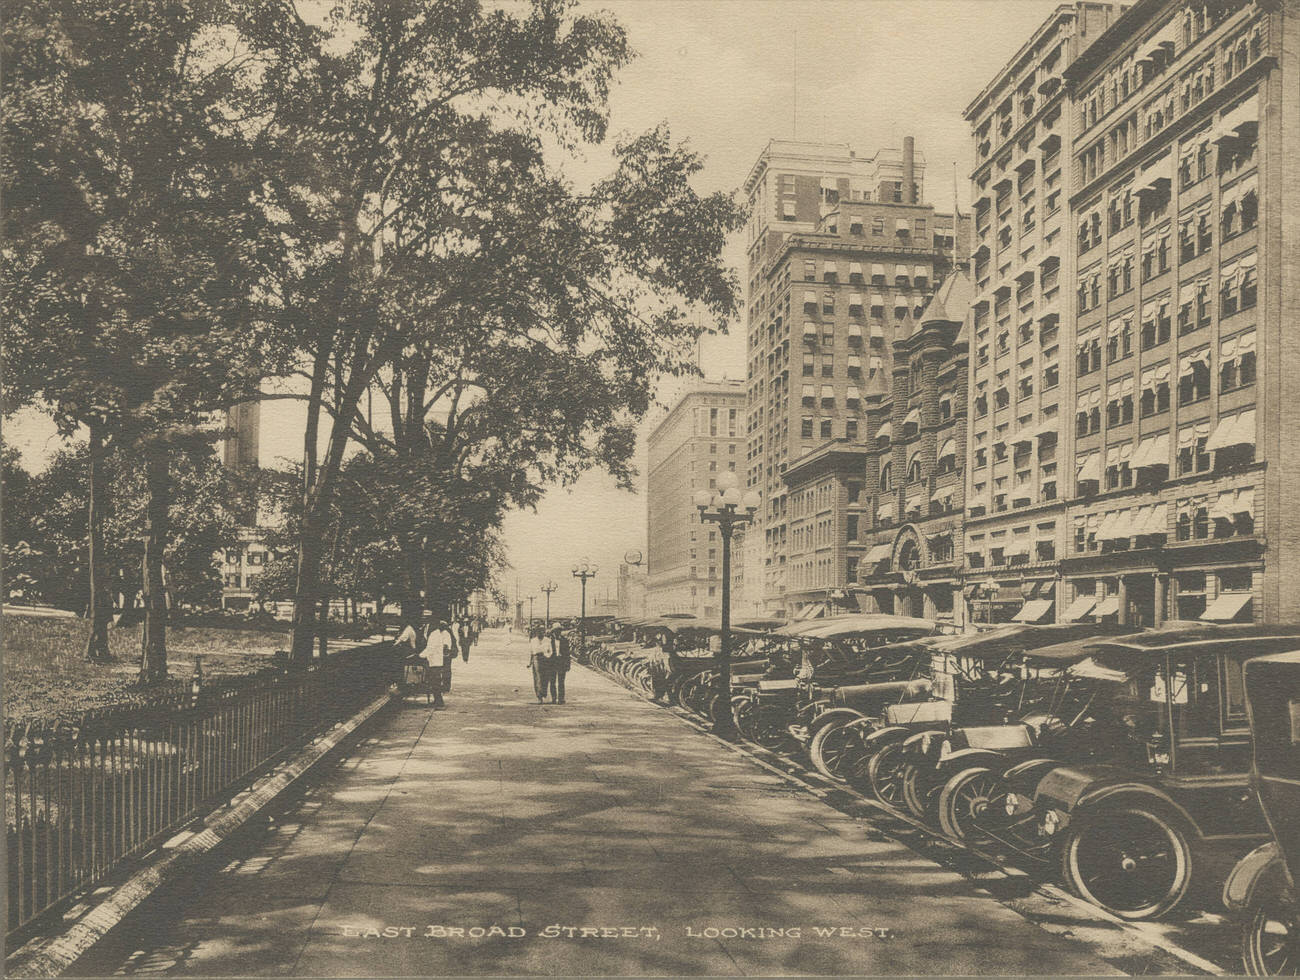 East Broad Street looking west with Outlook and Spahr Buildings, Columbus, 1916.